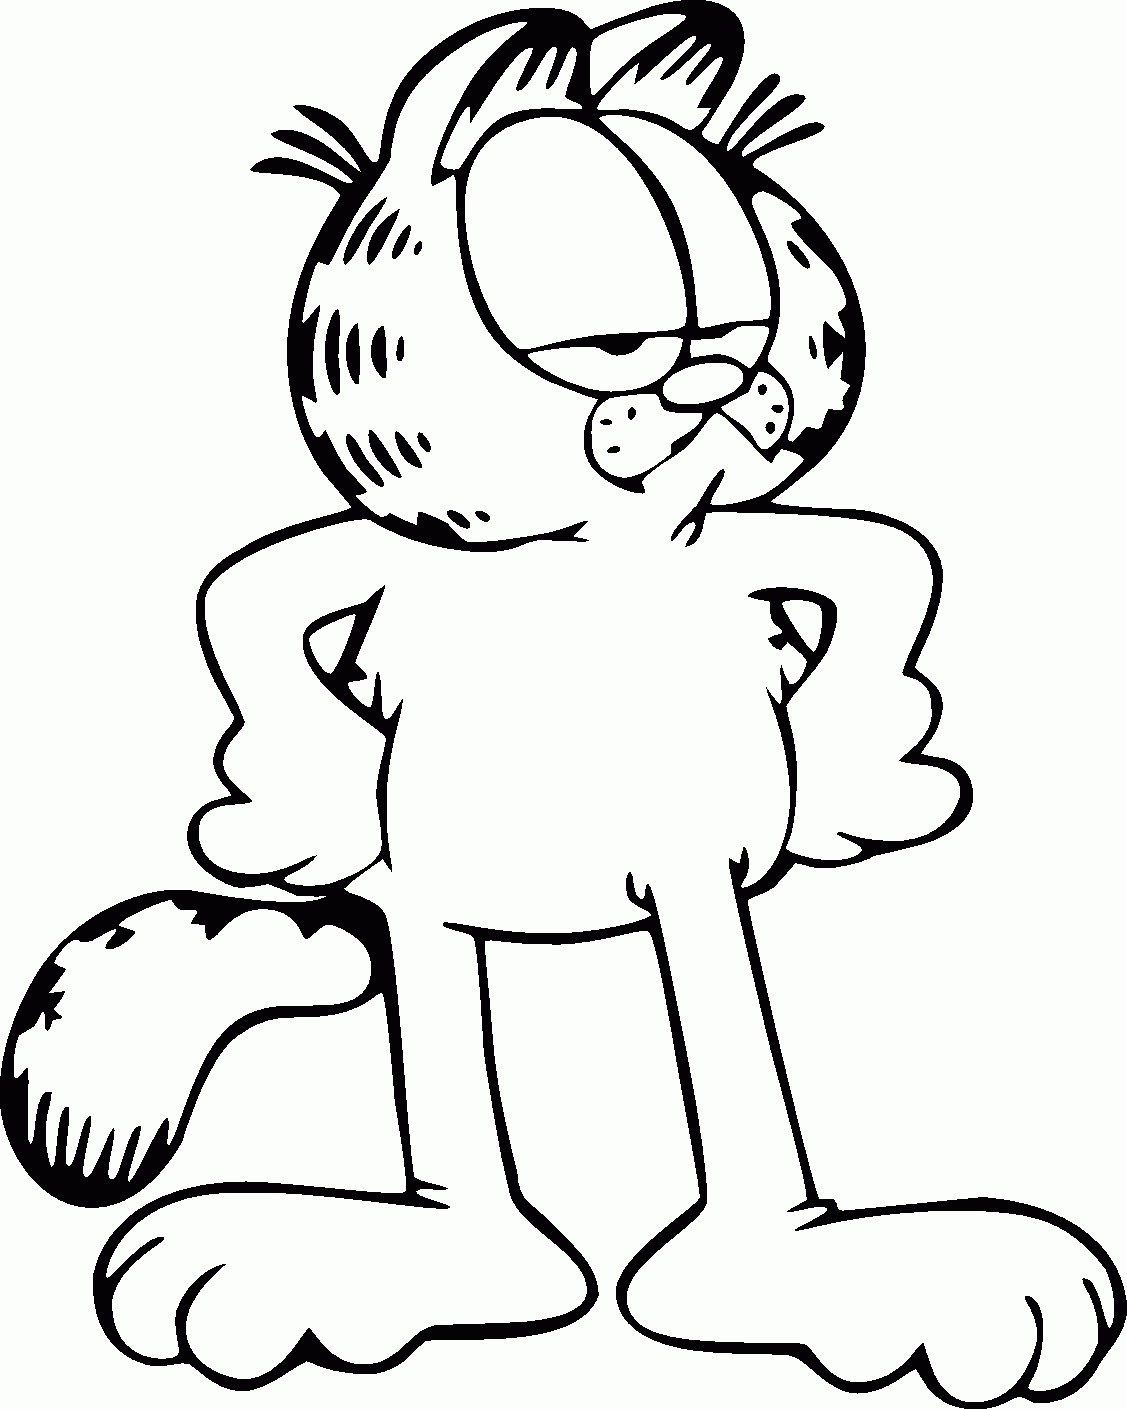 Garfield Coloring Pages at Free printable colorings